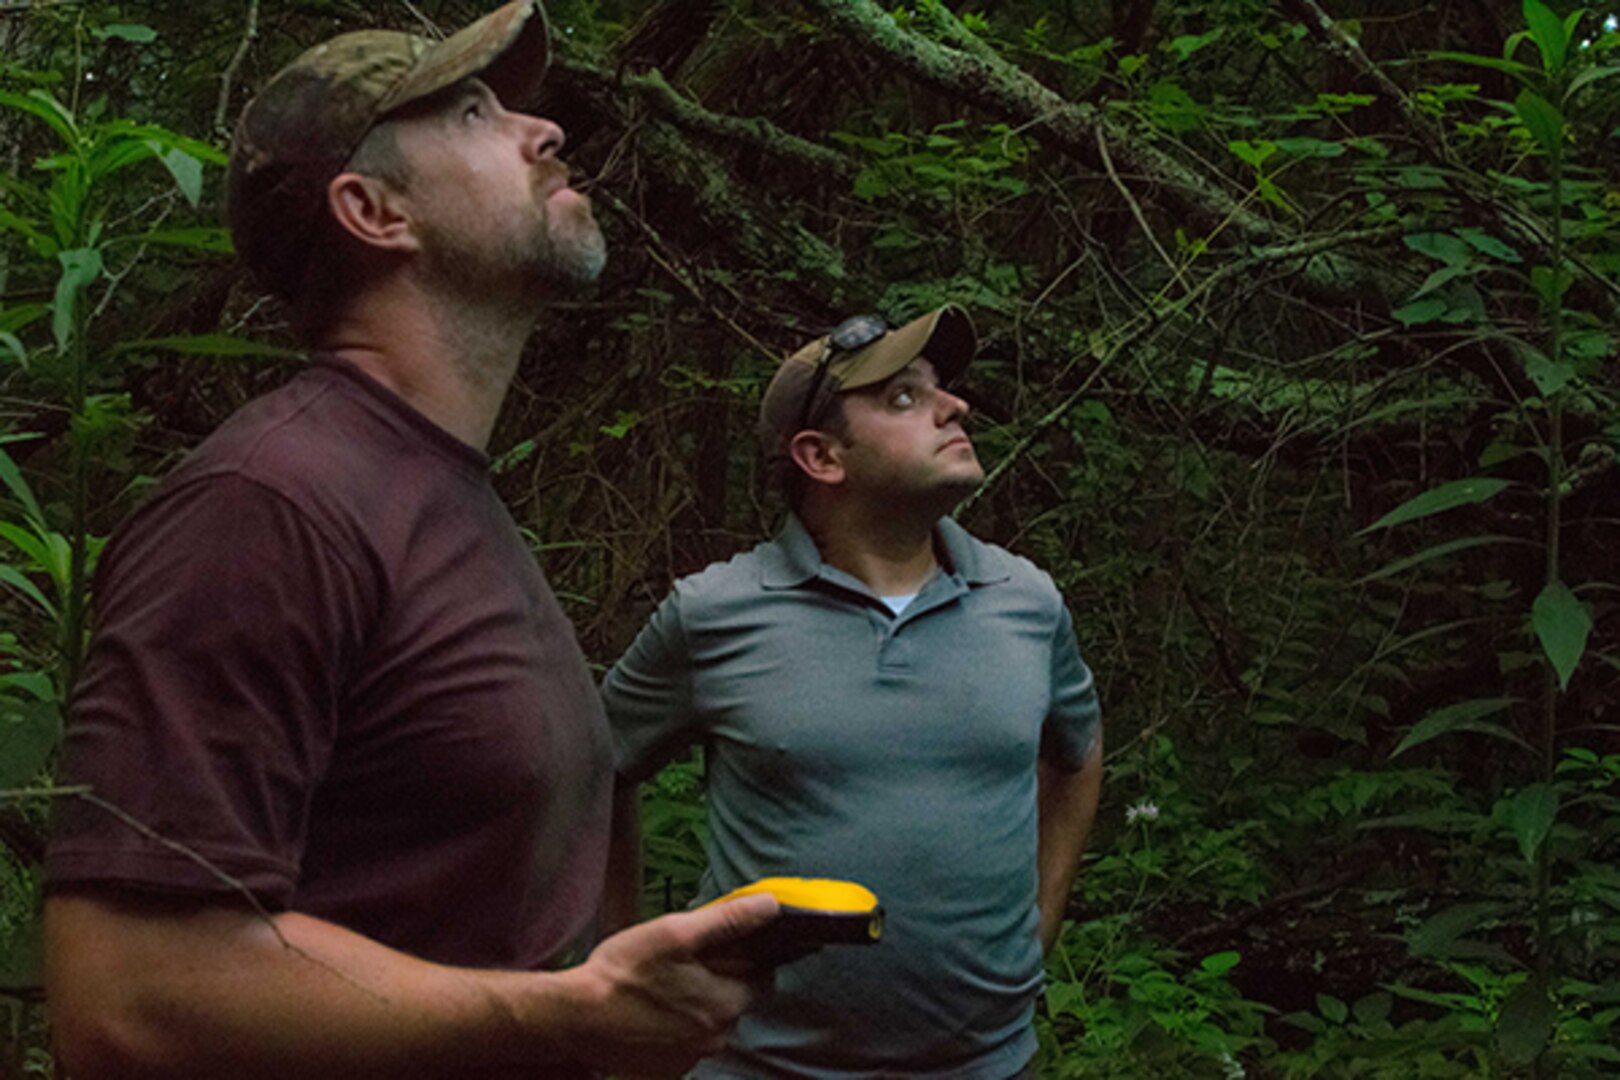 Mike Peterkin, deputy chief of conservation, right, and Todd Eubank, biologist for threatened and endangered species are tracking a bat roost at Camp Atterbury, Indiana, as part of the Acoustic Bat Training class held by the Environmental Management Office from July 11-16, 2016. The purpose of the class was to train the environmentalists on new methods of capturing ultrasonic bat calls that are used to recognize and identify the calls with the species they belong to. This information will further their understanding about the bat habitats, and how Camp Atterbury’s training affects their ecosystem. 
